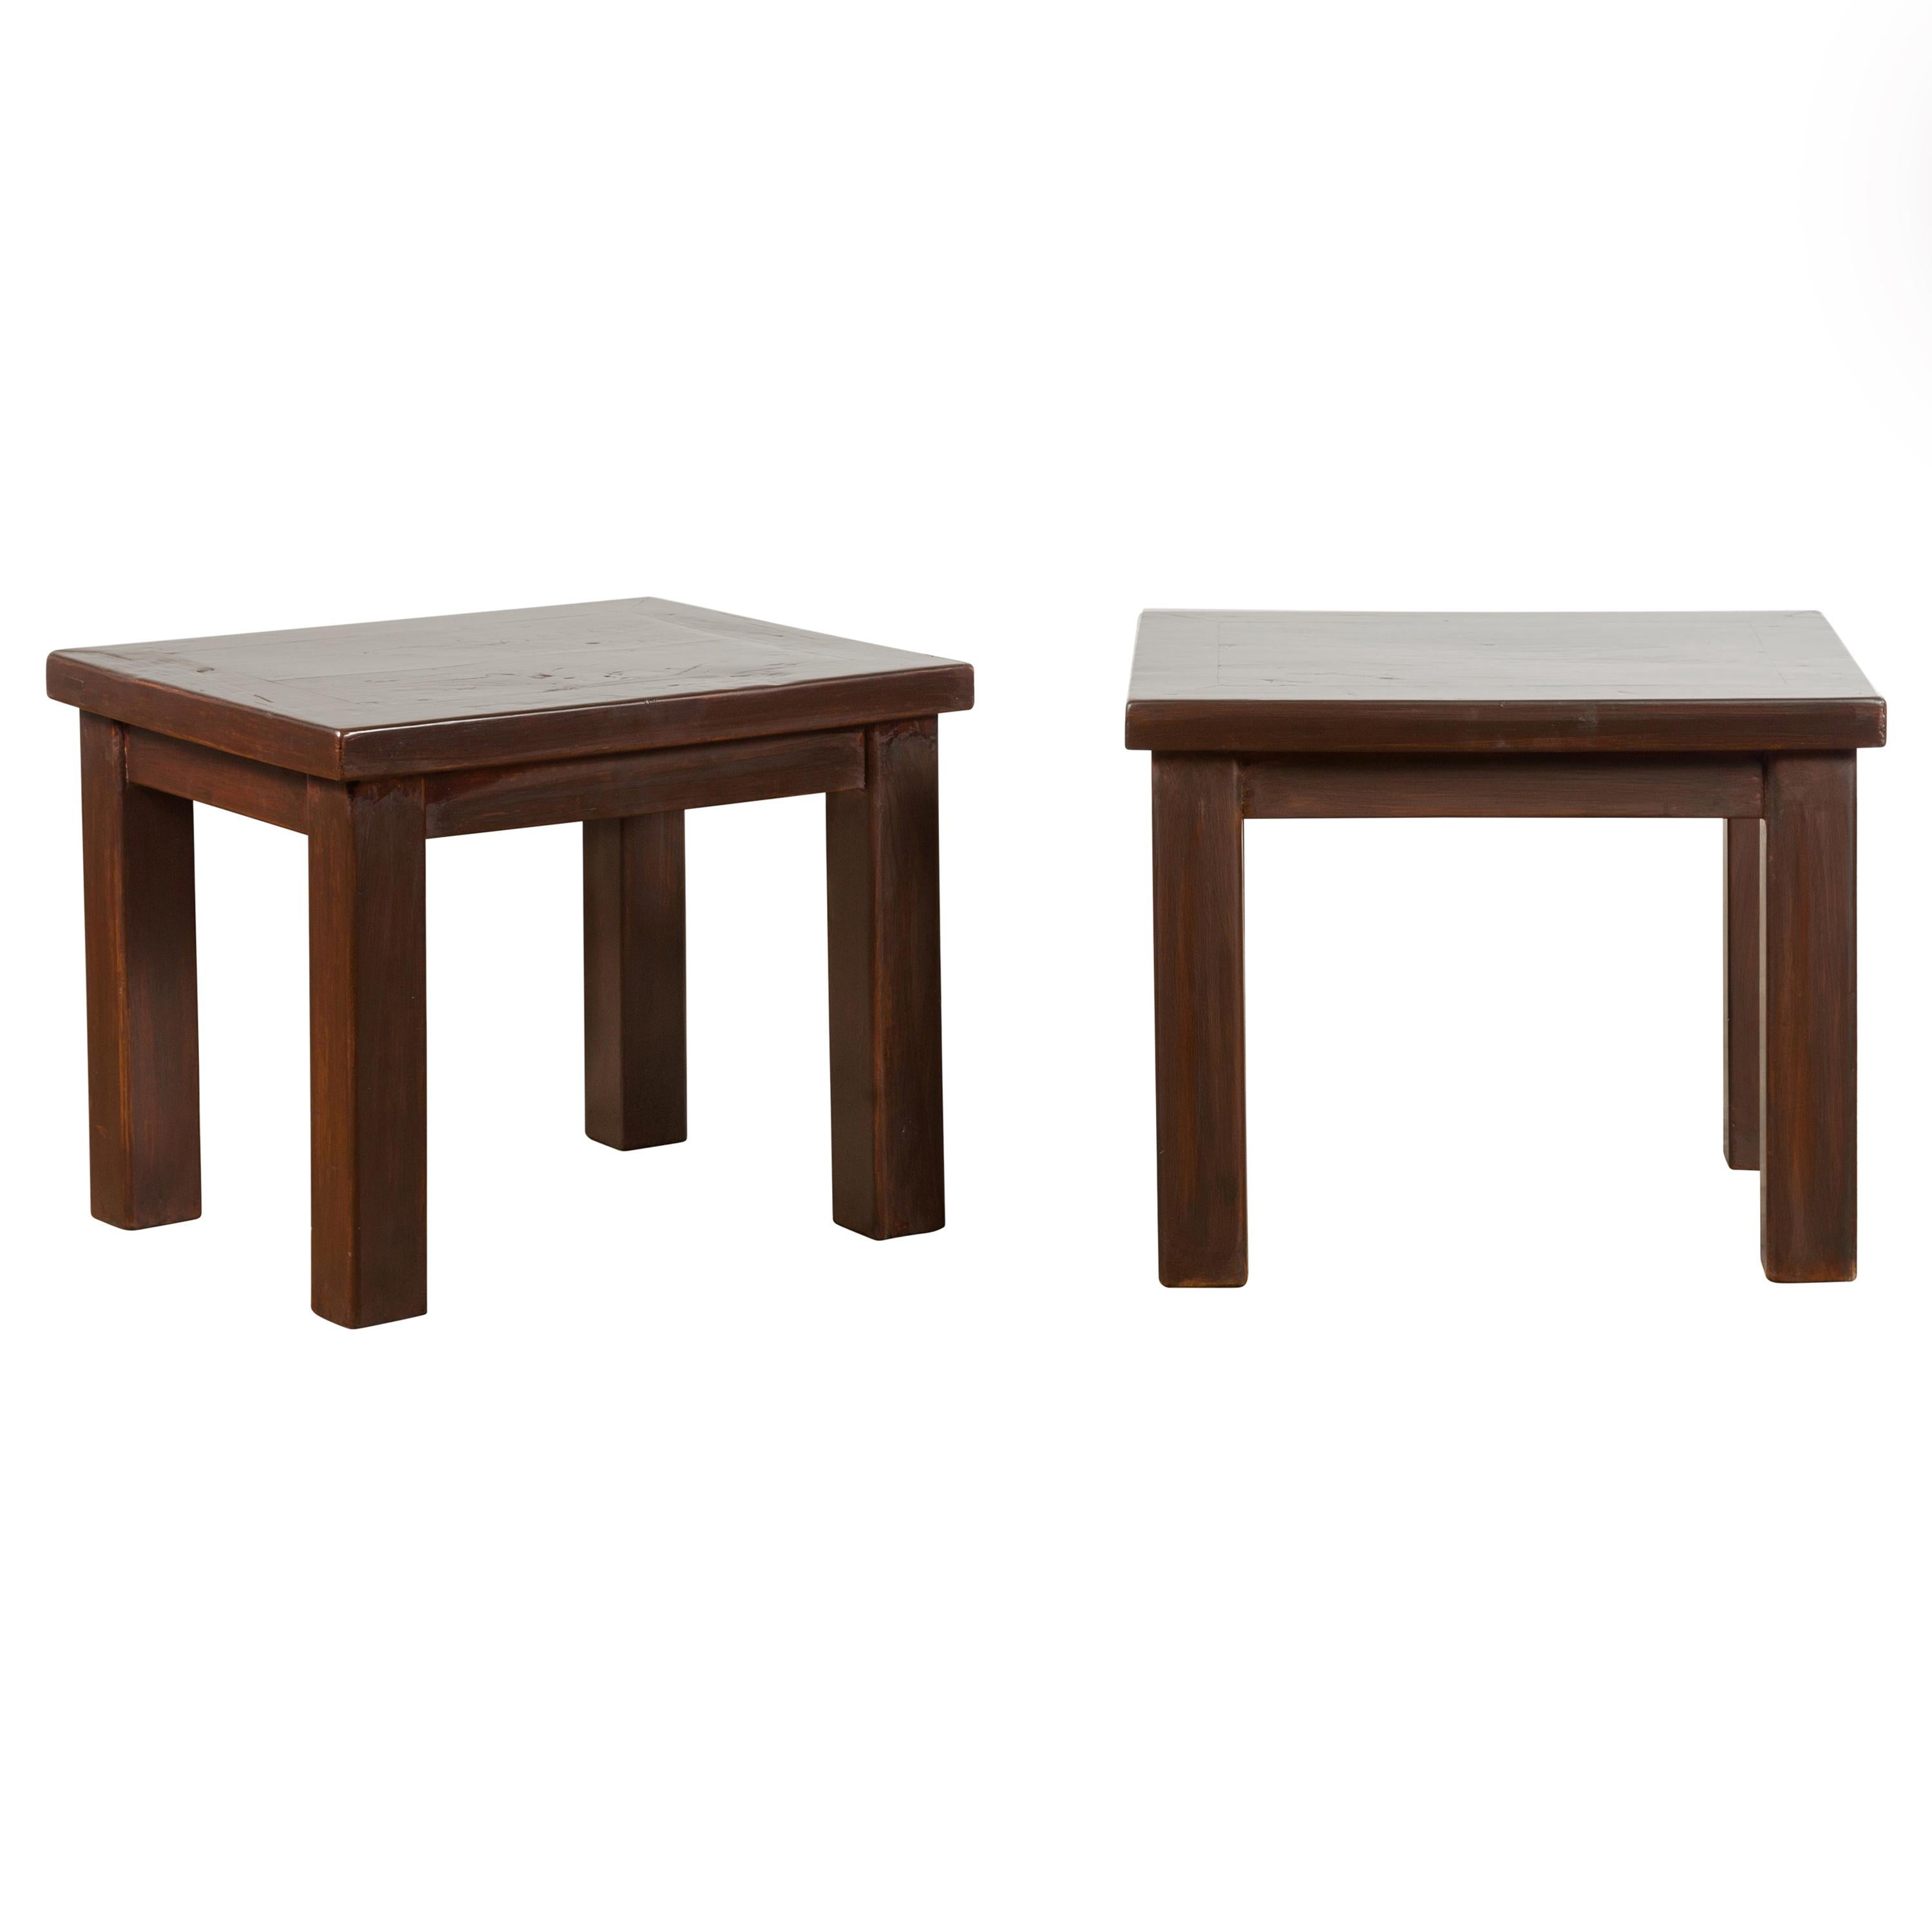 Chinese Contemporary Side Tables with Straight Legs and Dark Patina, Sold Each